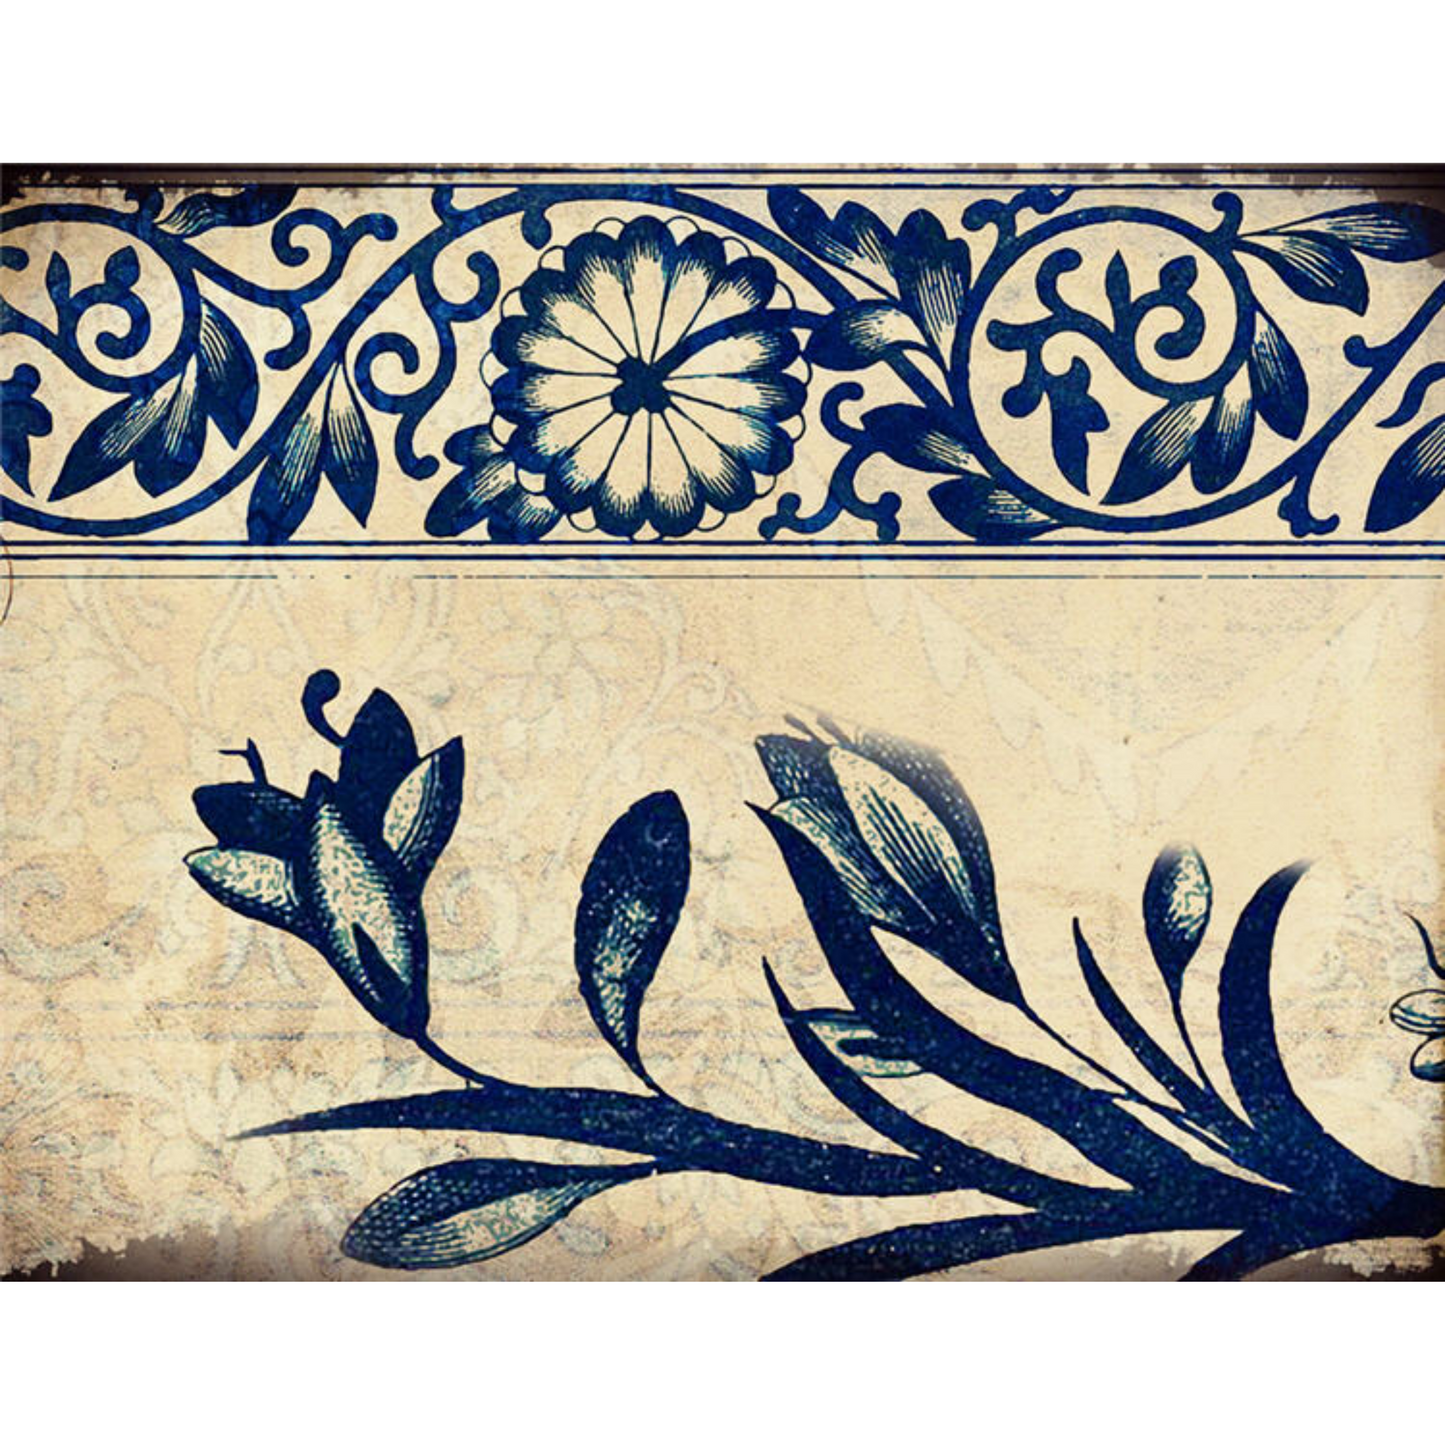 Monahan Papers "Blue Indigo Floral Border" 11" x 17"  Navy blue print on light background. Aged paper for decoupage and mixed media art available at Milton's Daughter